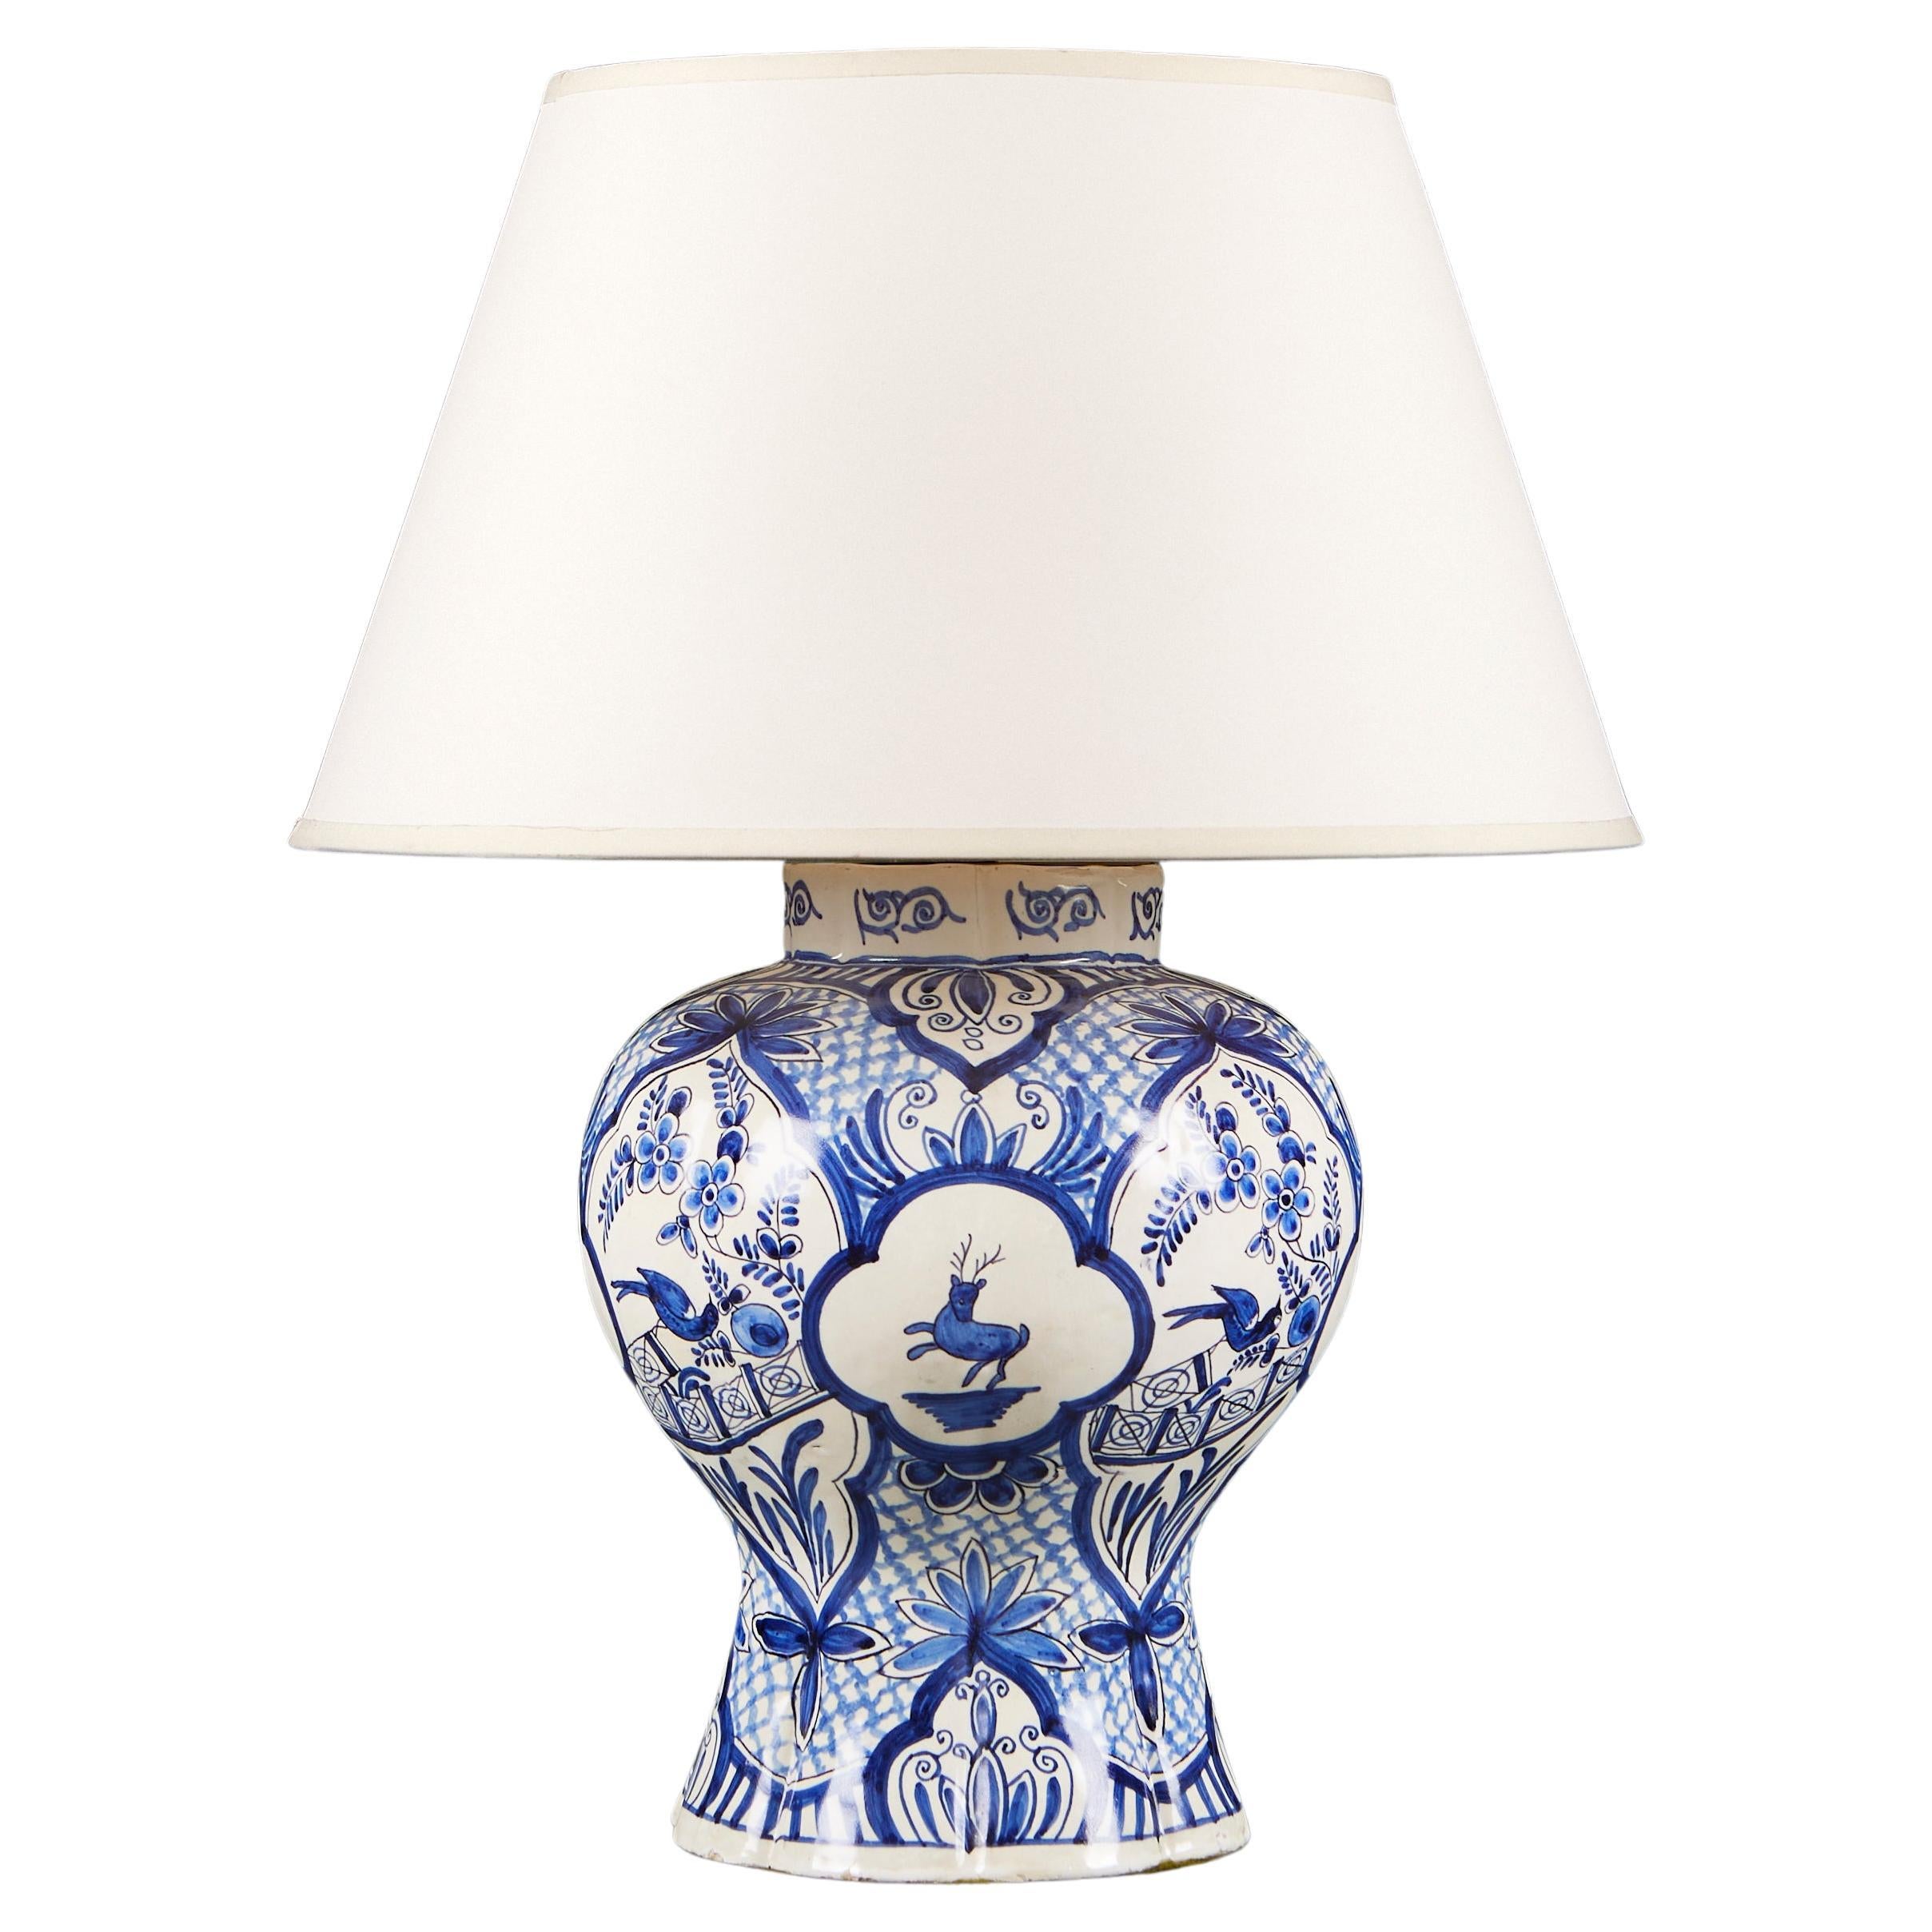 A Blue And White Delft Vase As A Lamp